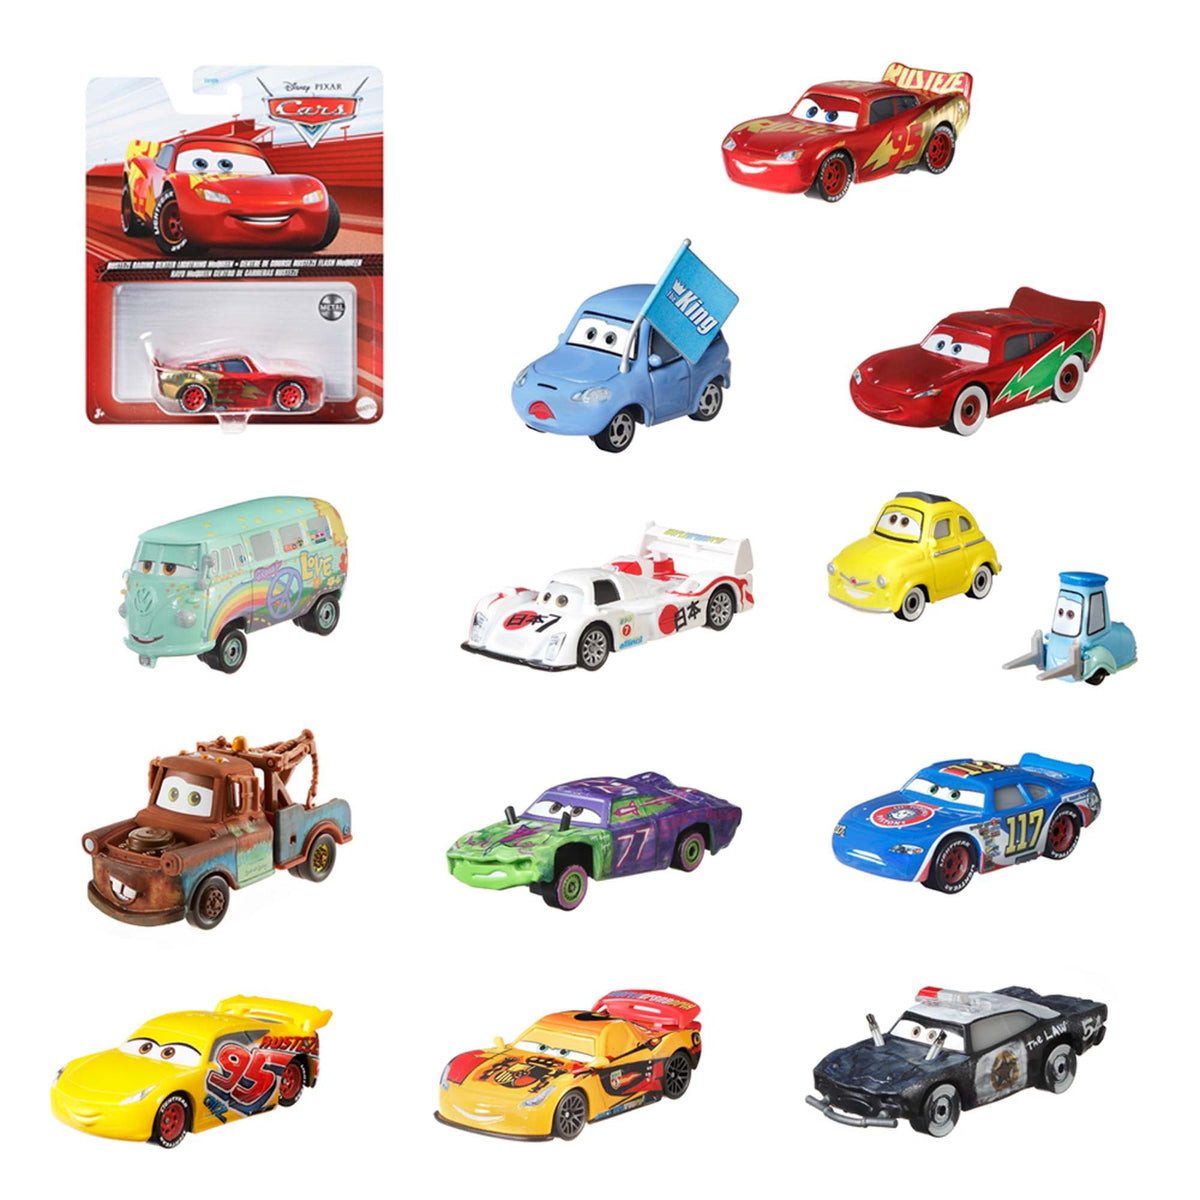 JOUET K.I.D. INC. Toys & Games Cars 1:55 Small Toy Car, Assortment, 1 Count 887961686968